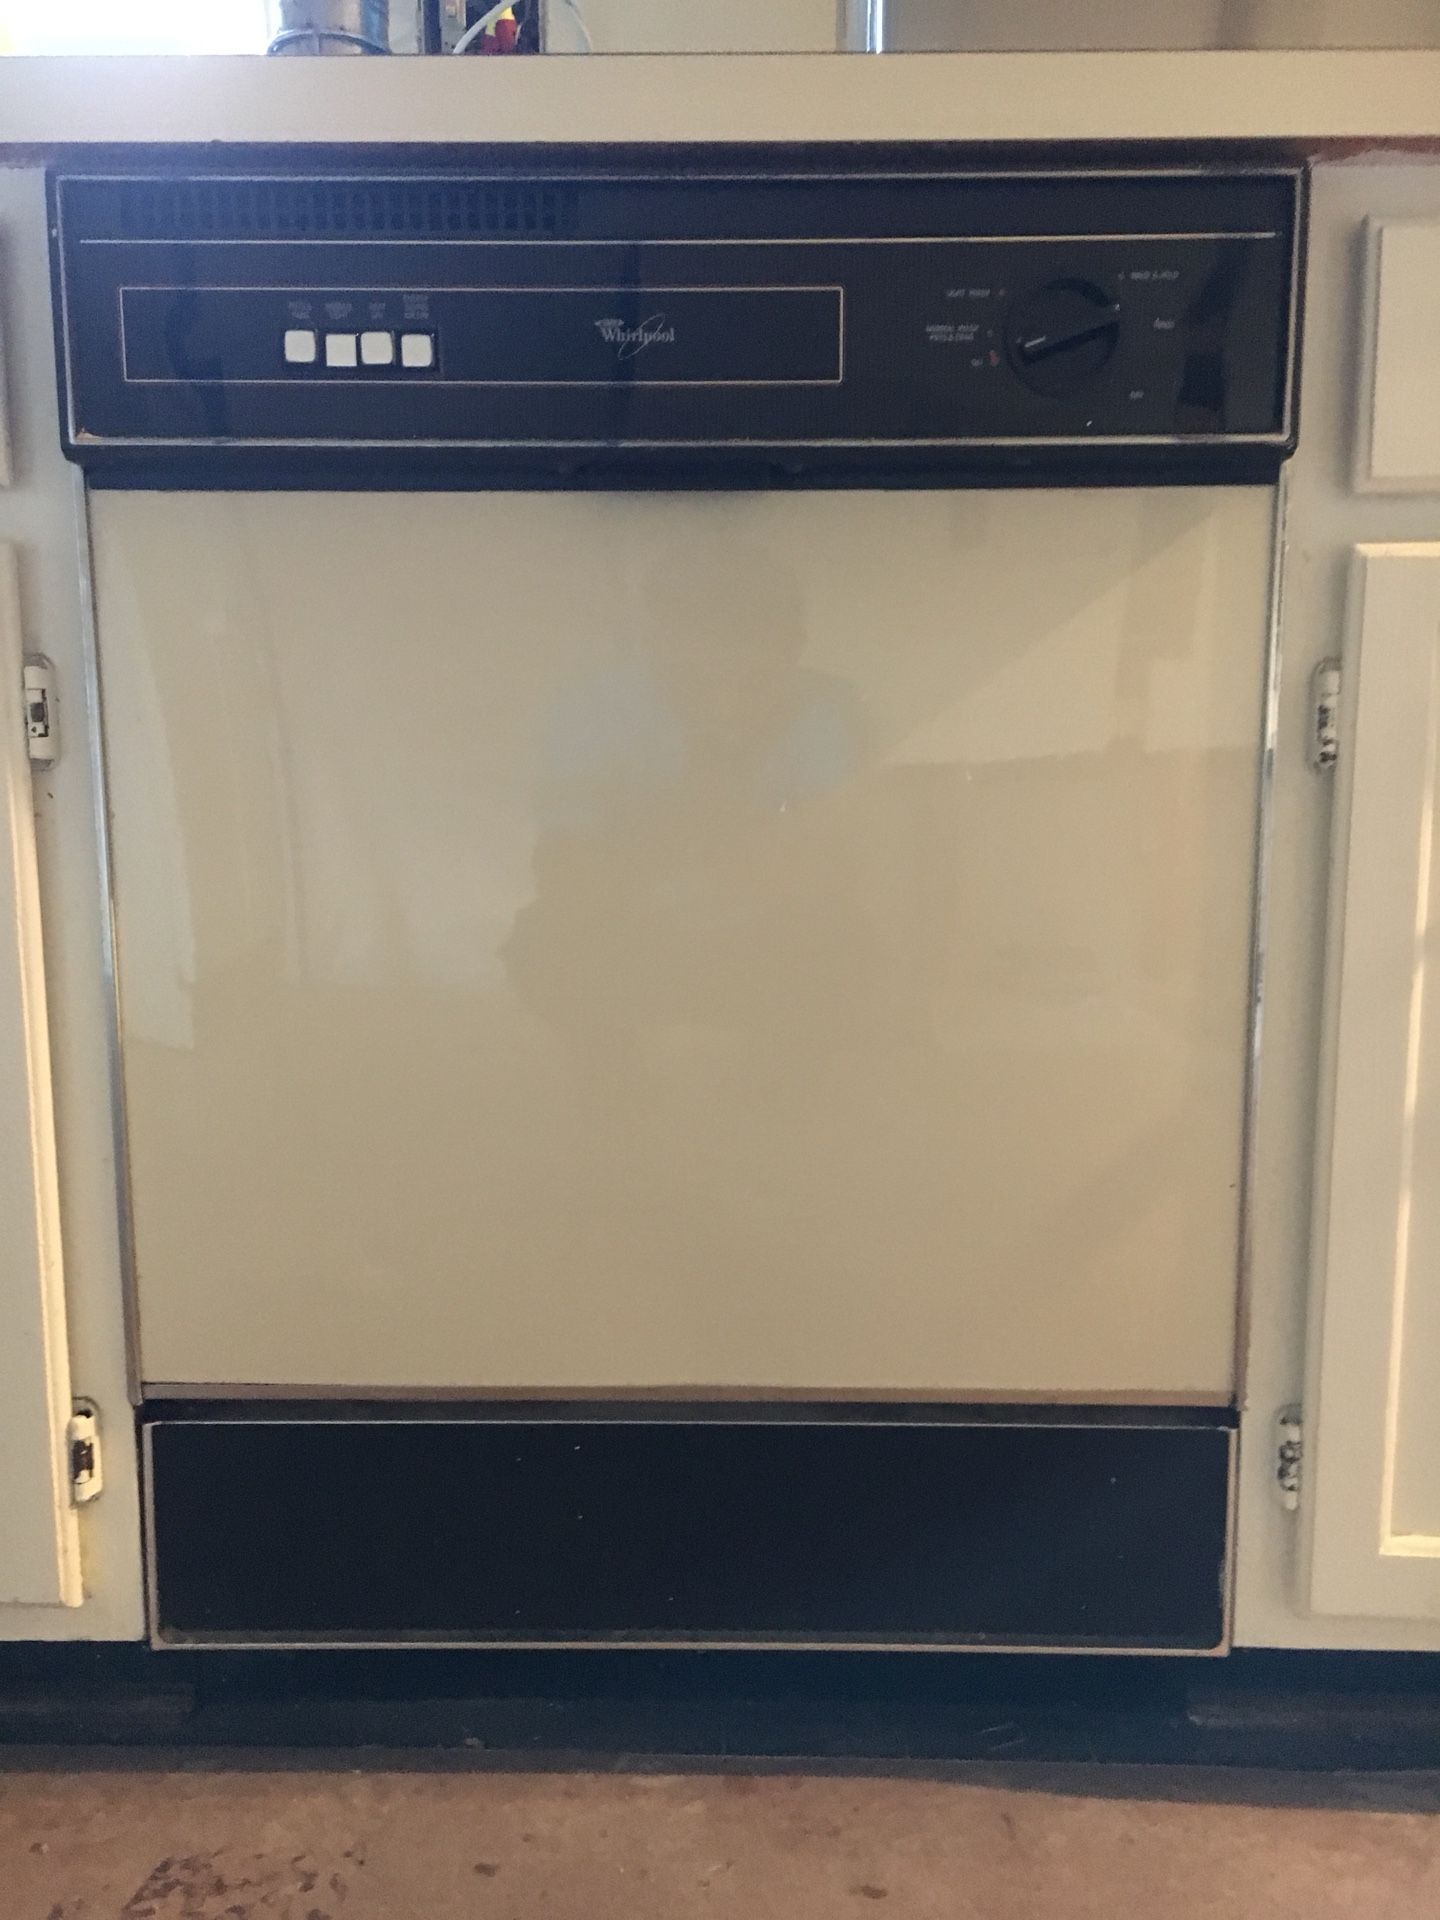 Whirlpool Dishwasher in perfect working condition